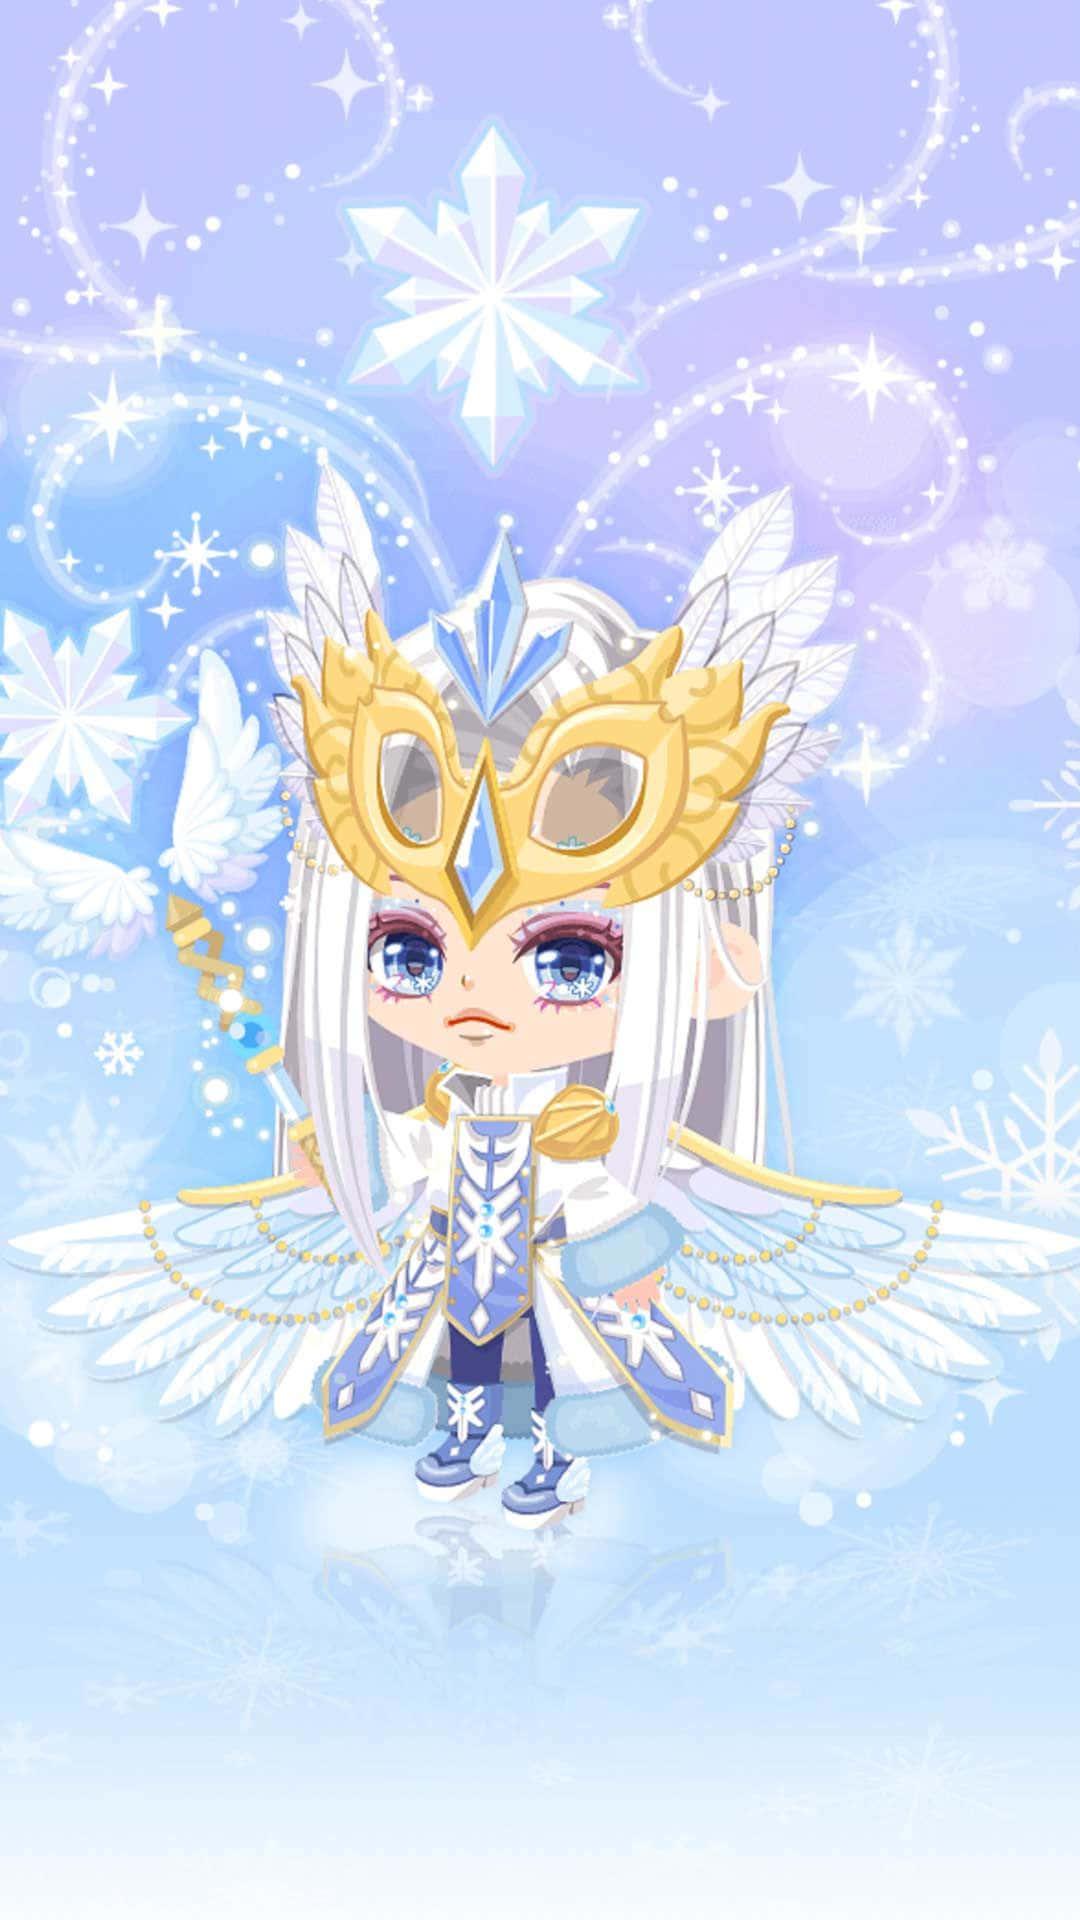 A Girl With Wings And Snowflakes Wallpaper